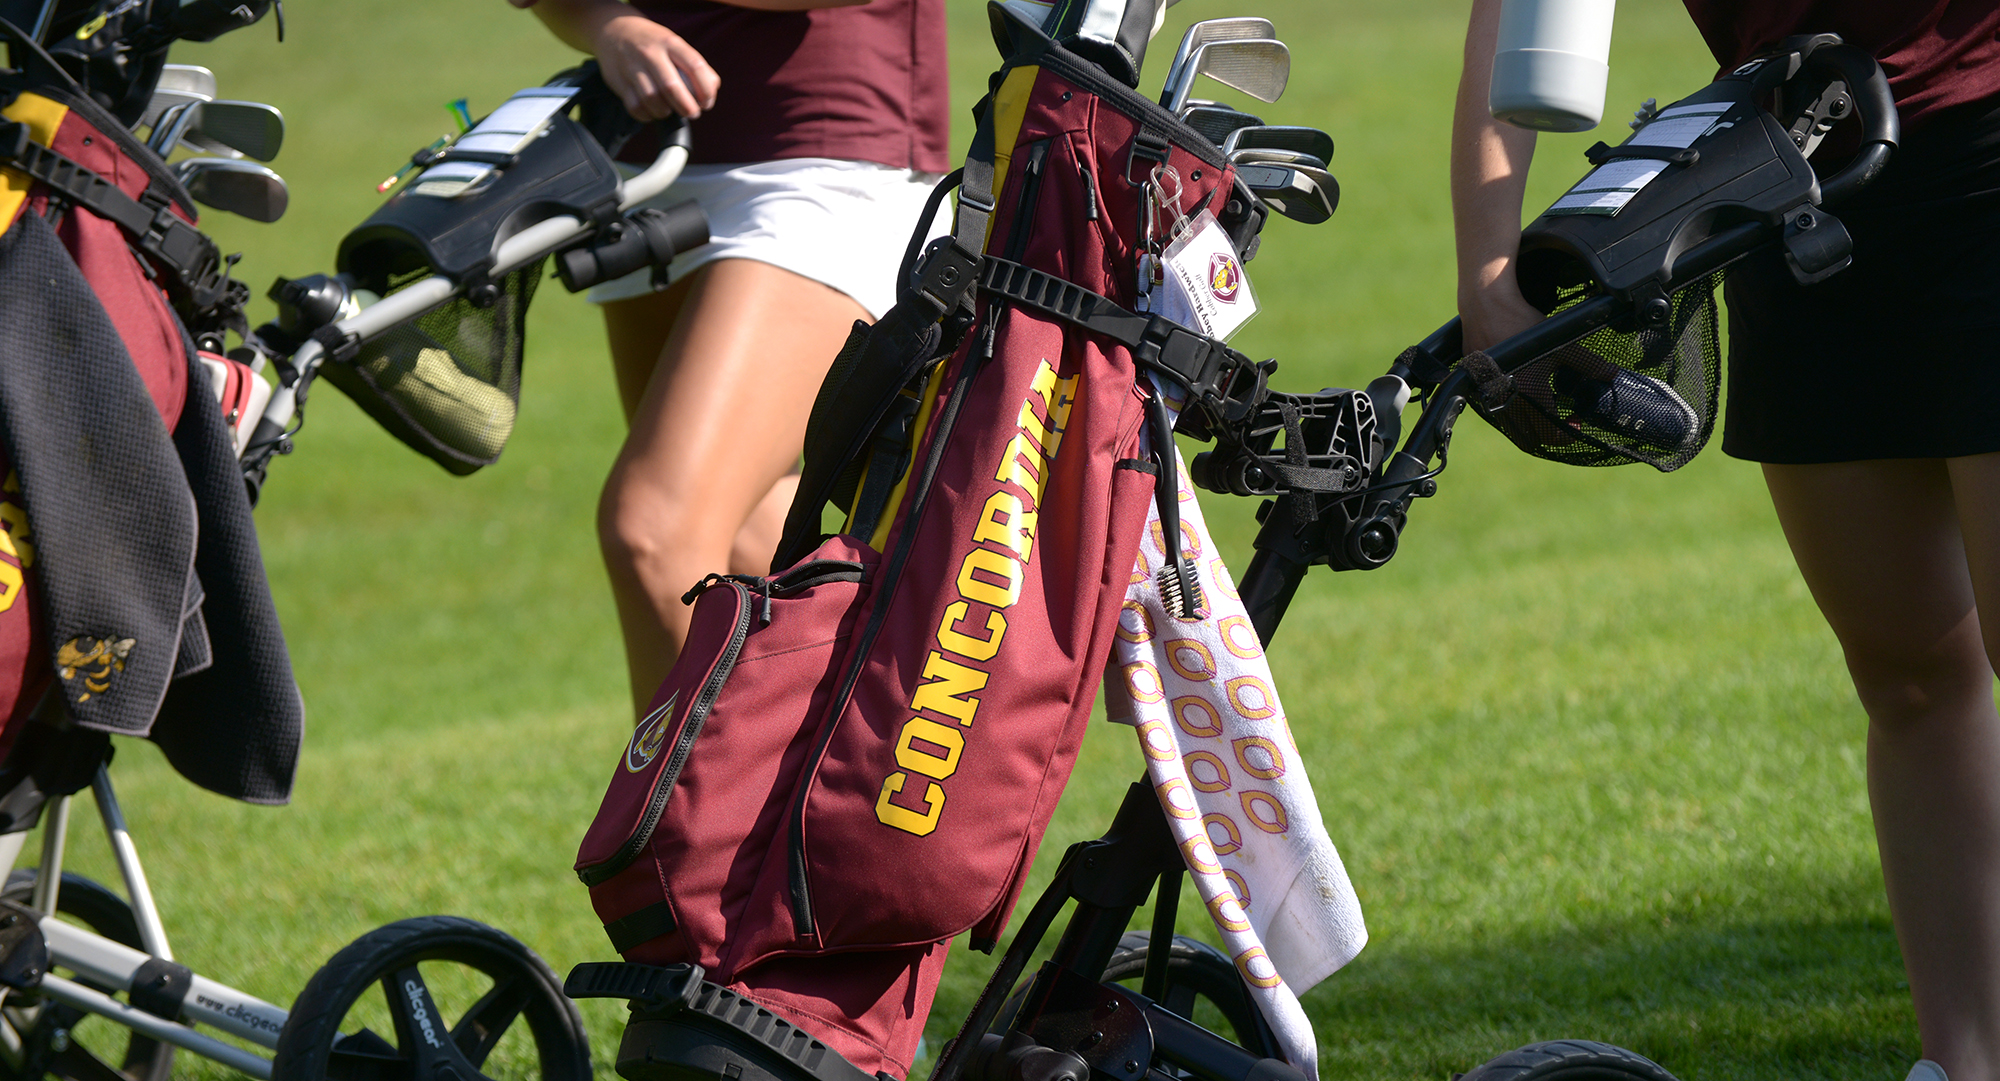 The Cobbers finished off their second meet of the season by finishing ninth at the Tracy Lane Memorial Tournament hosted by Bemidji St.